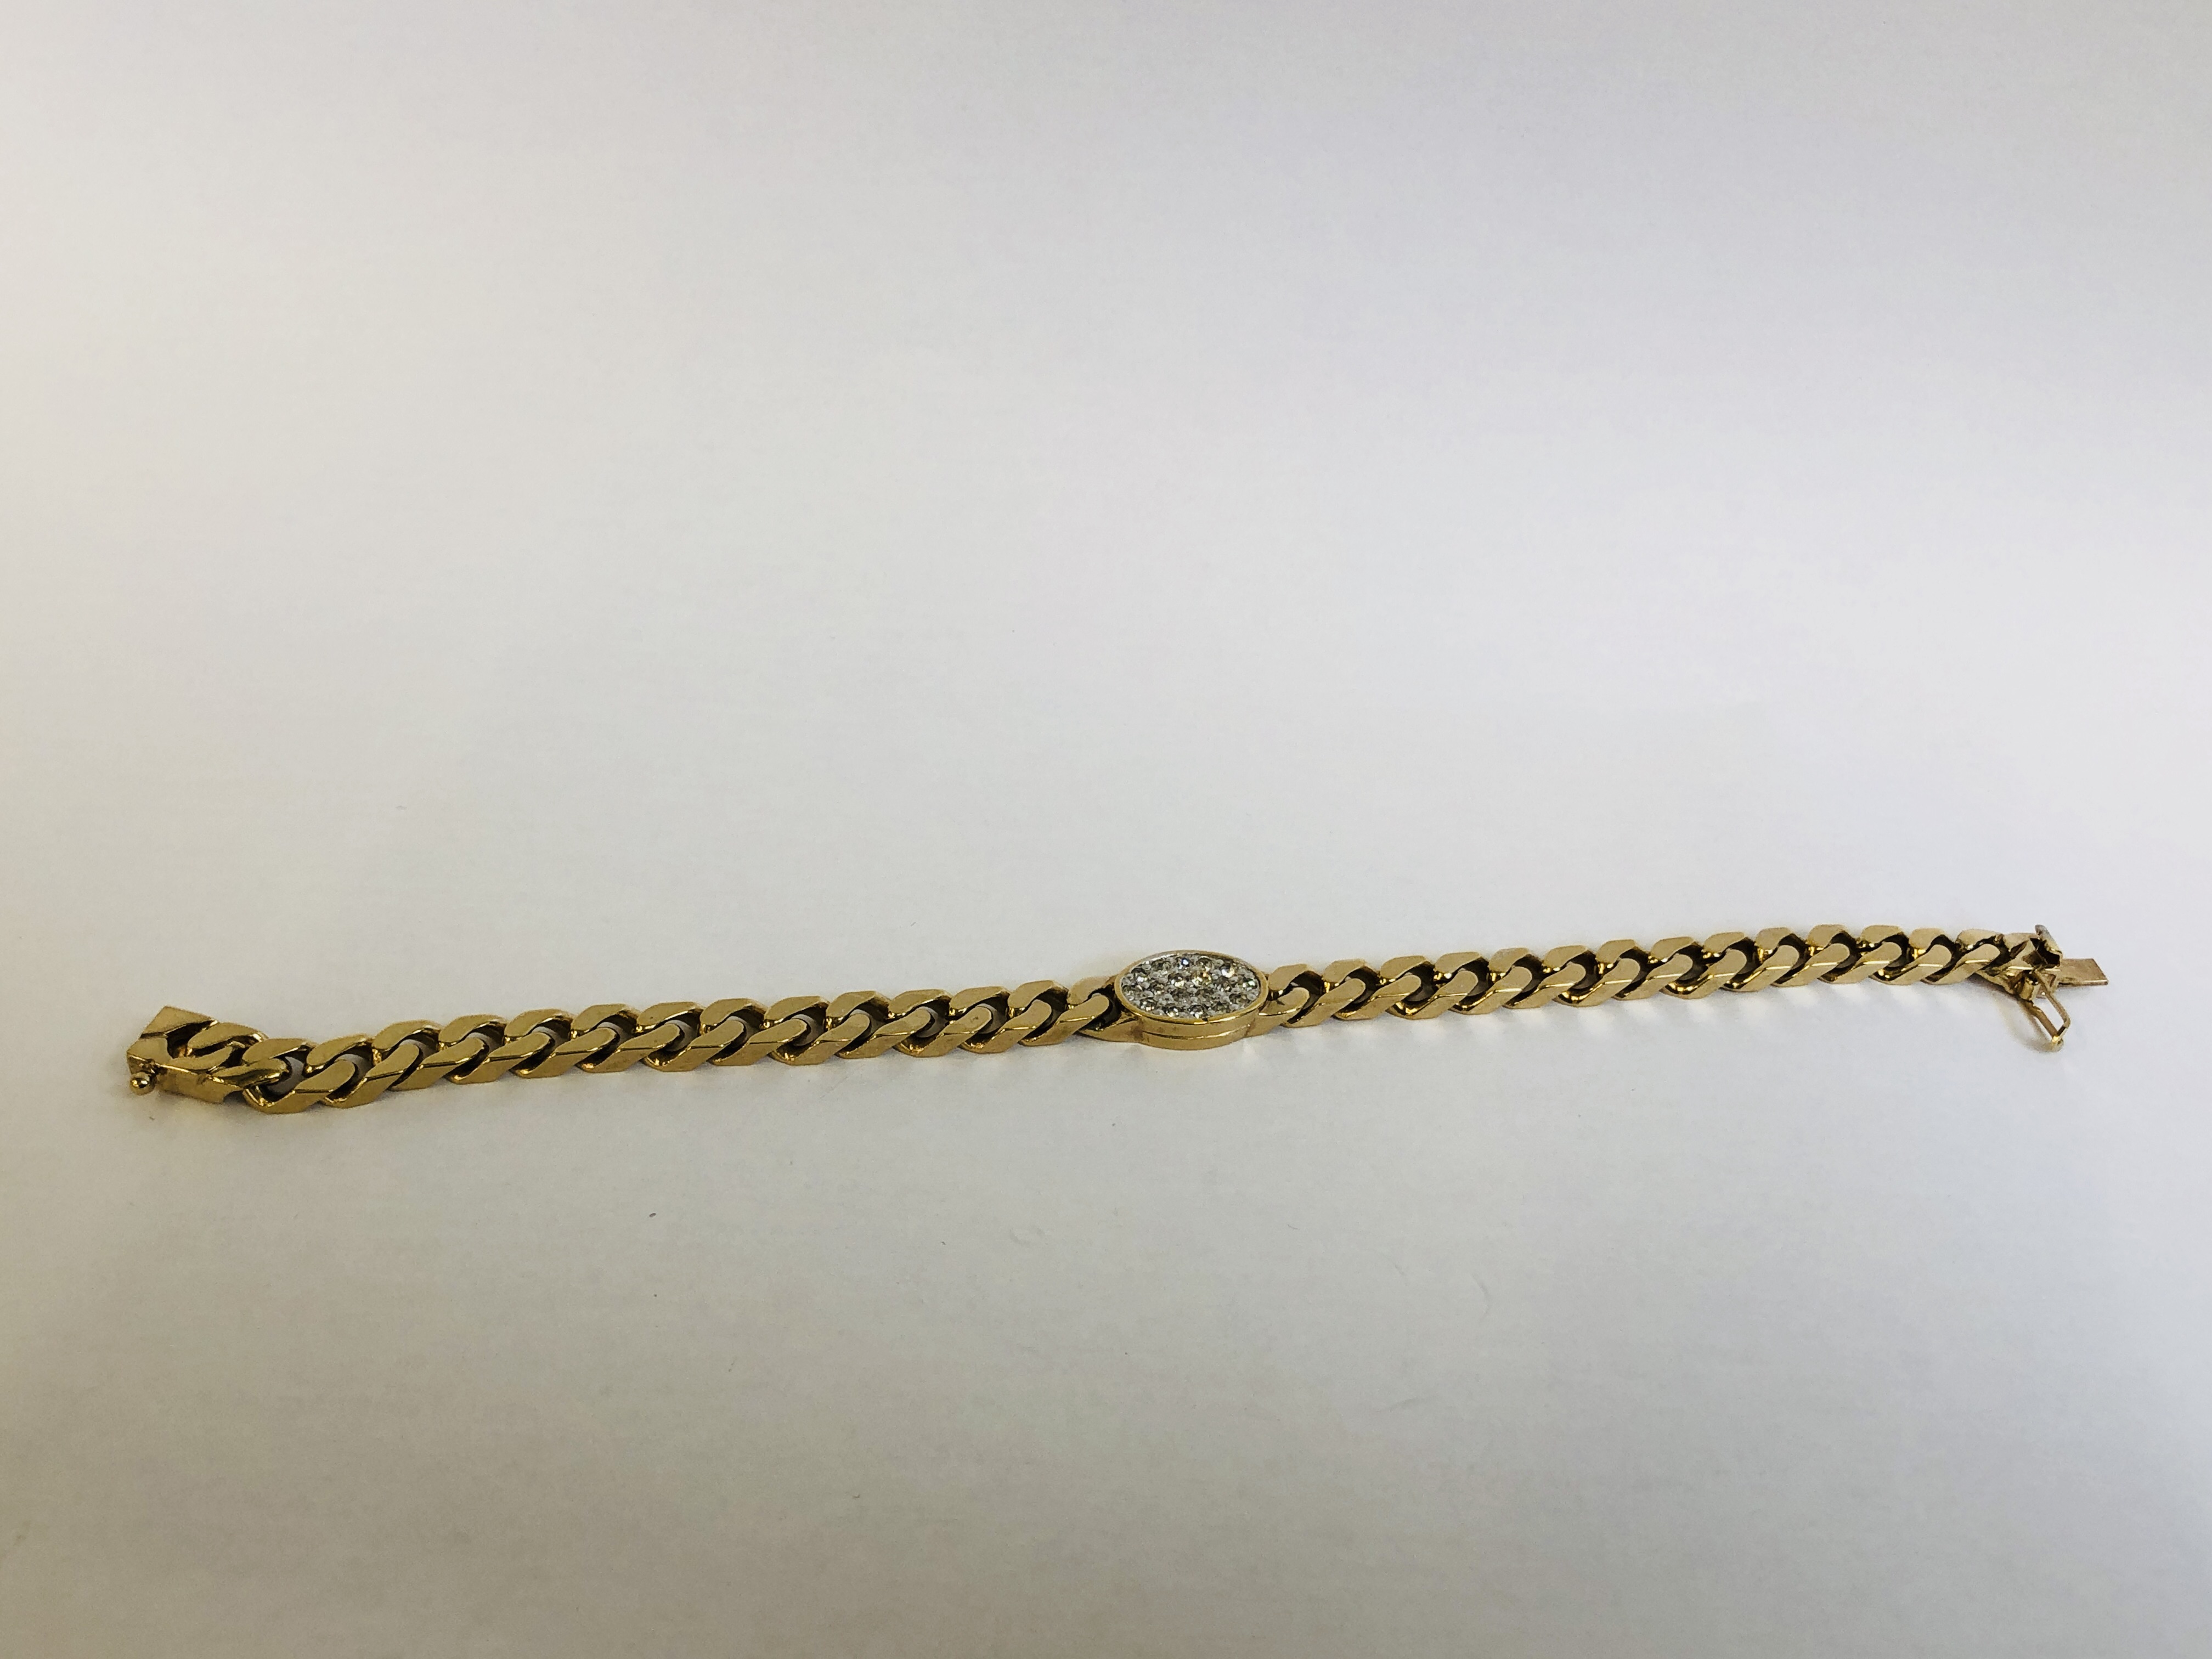 A GOLD TONE COSTUME BRACELET MARKED "PANETTA" ALONG WITH AN UNMARKED ROPE TWIST NECKLACE. - Image 8 of 13